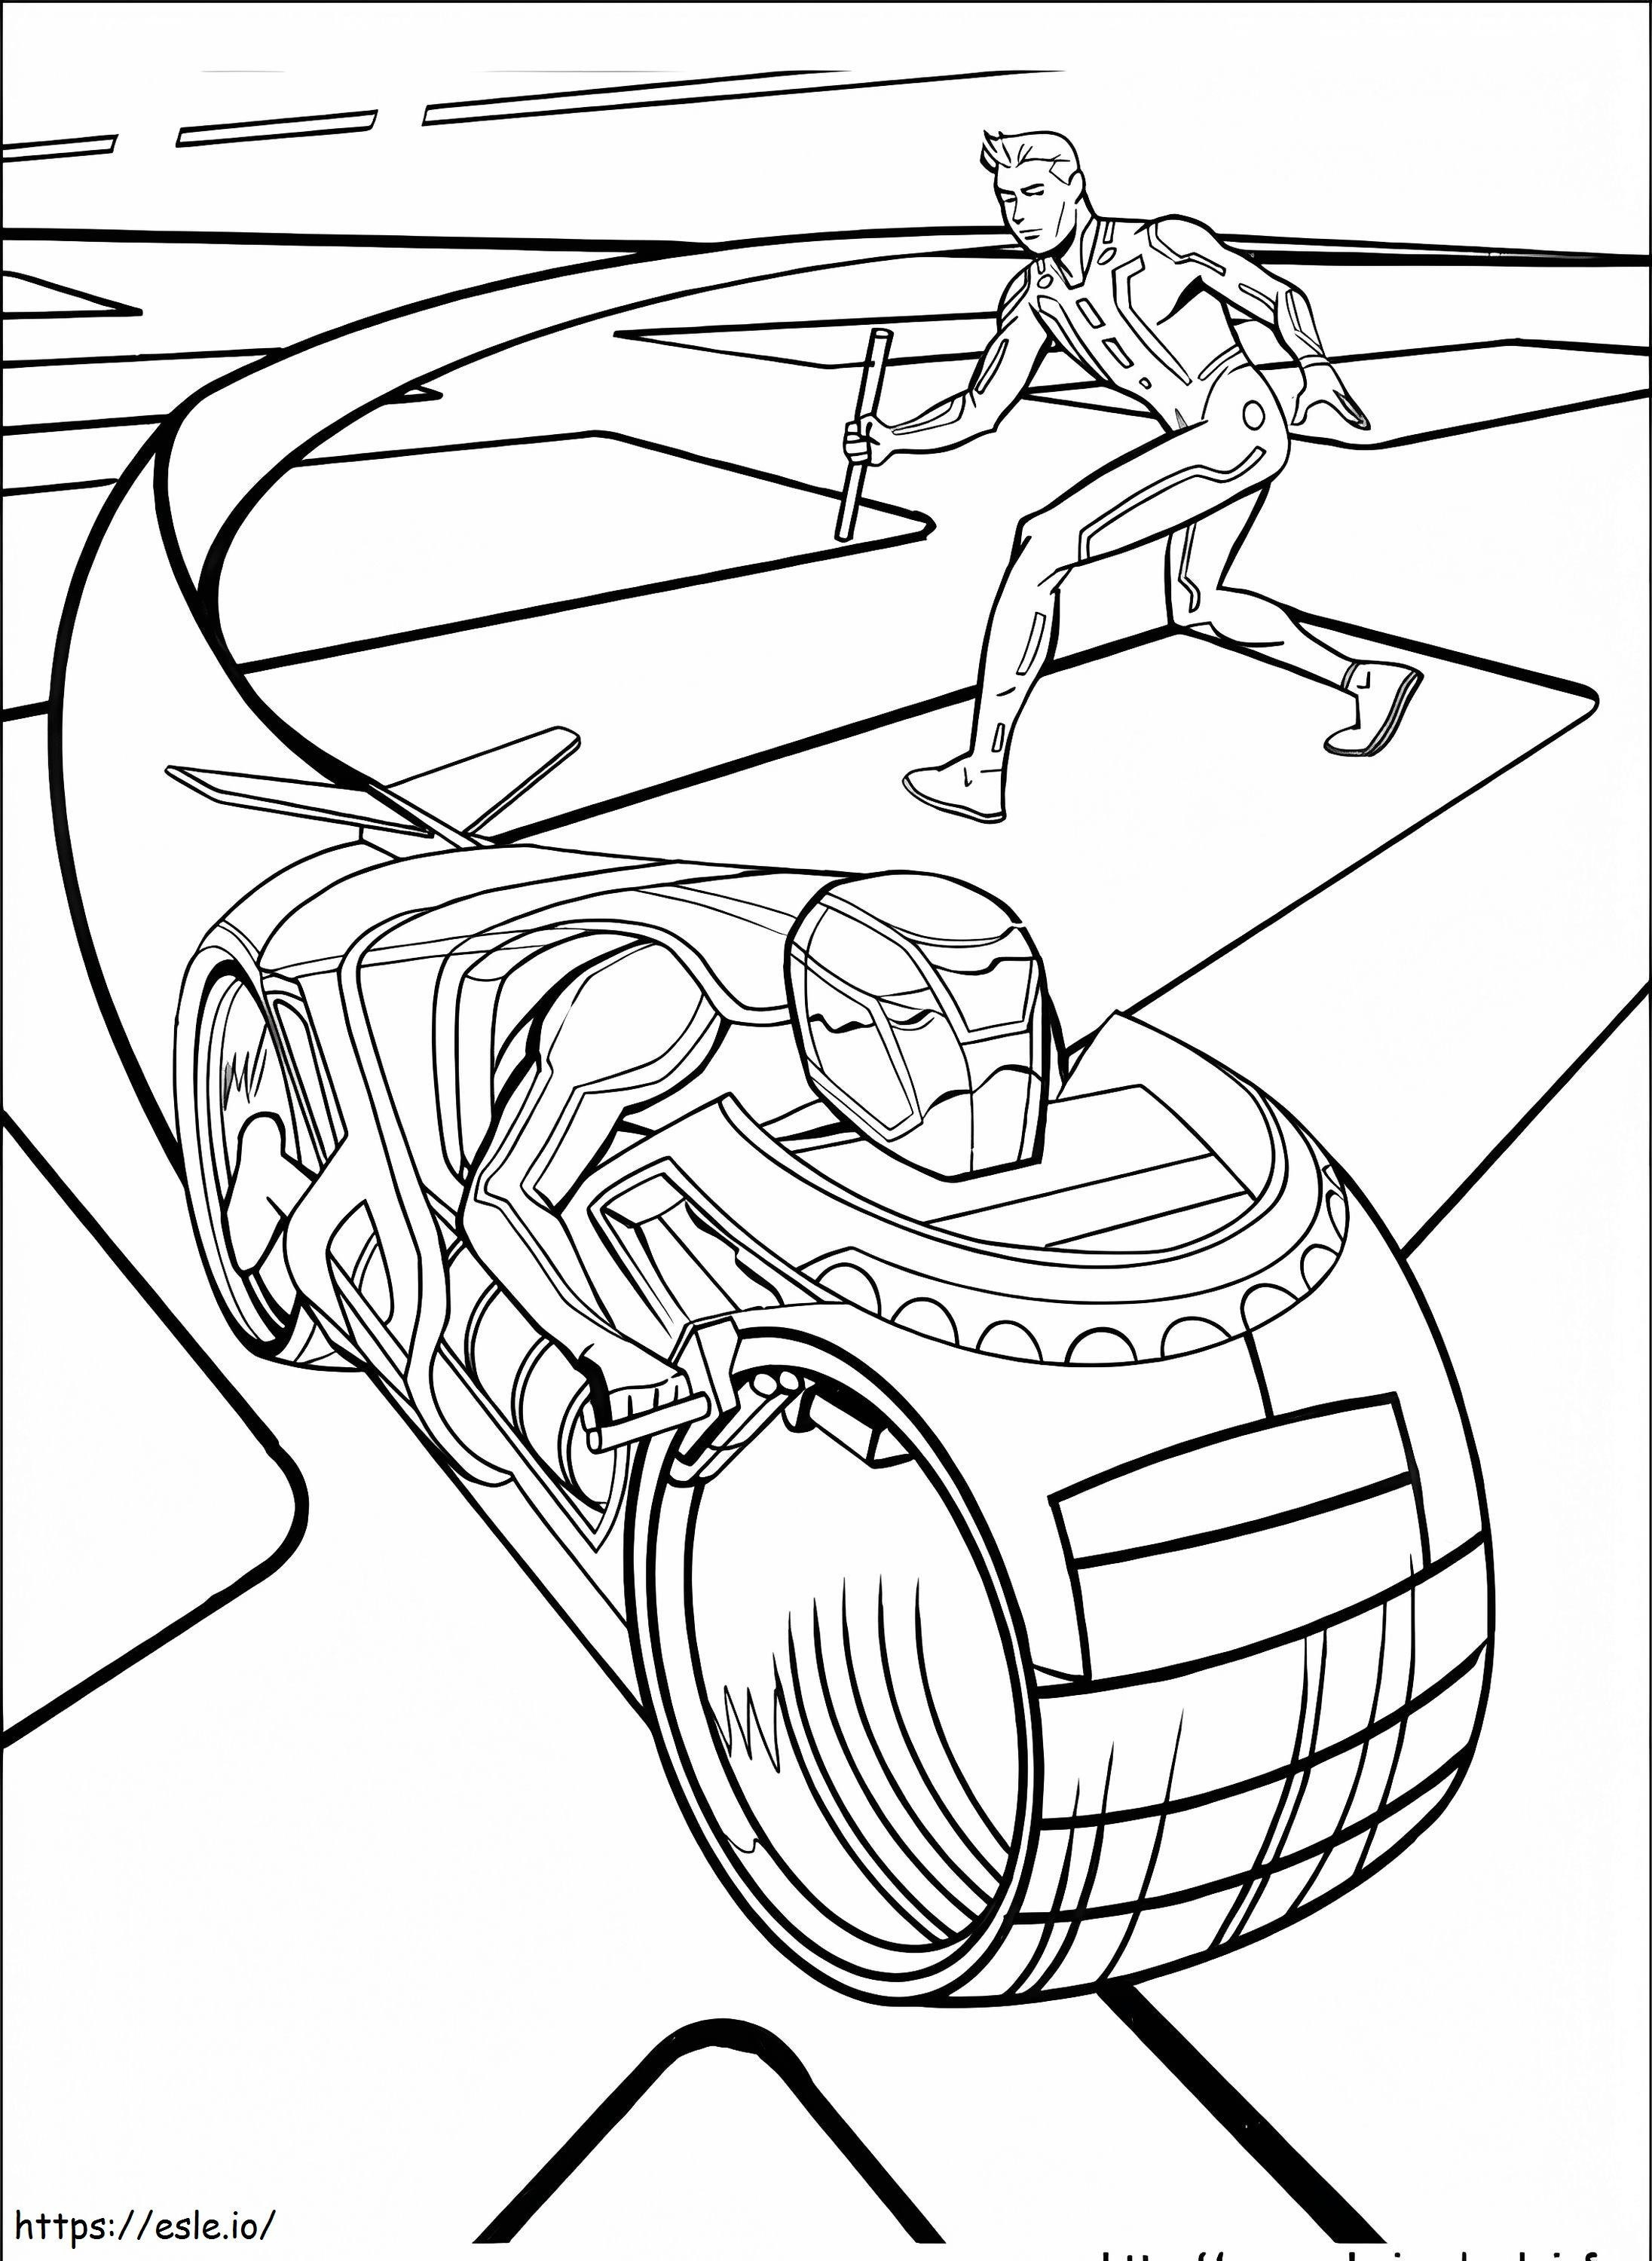 Tron 3 coloring page